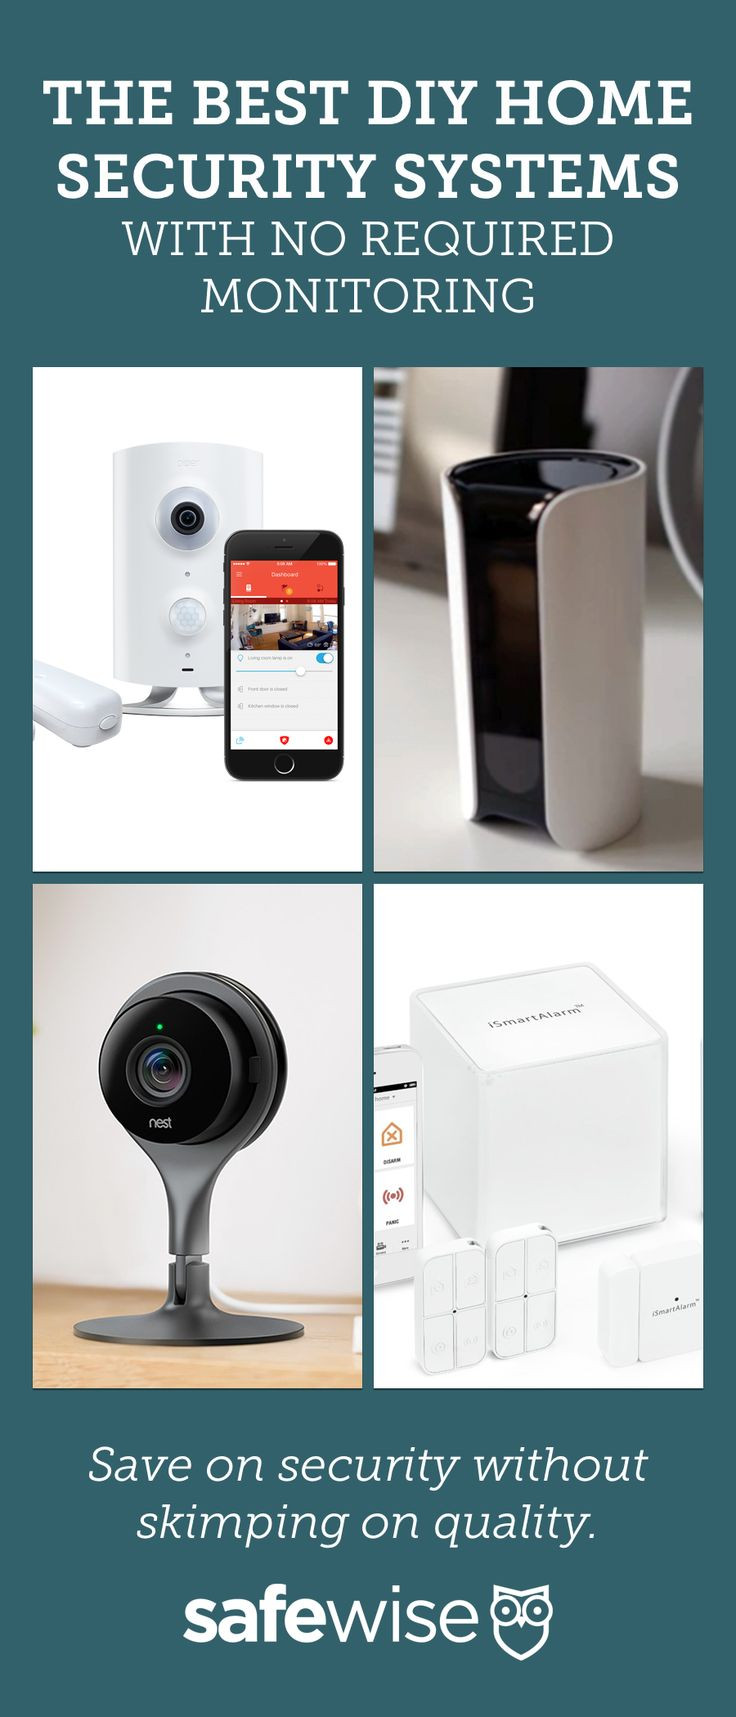 Home Security Systems DIY
 79 best images about DIY Home Security on Pinterest